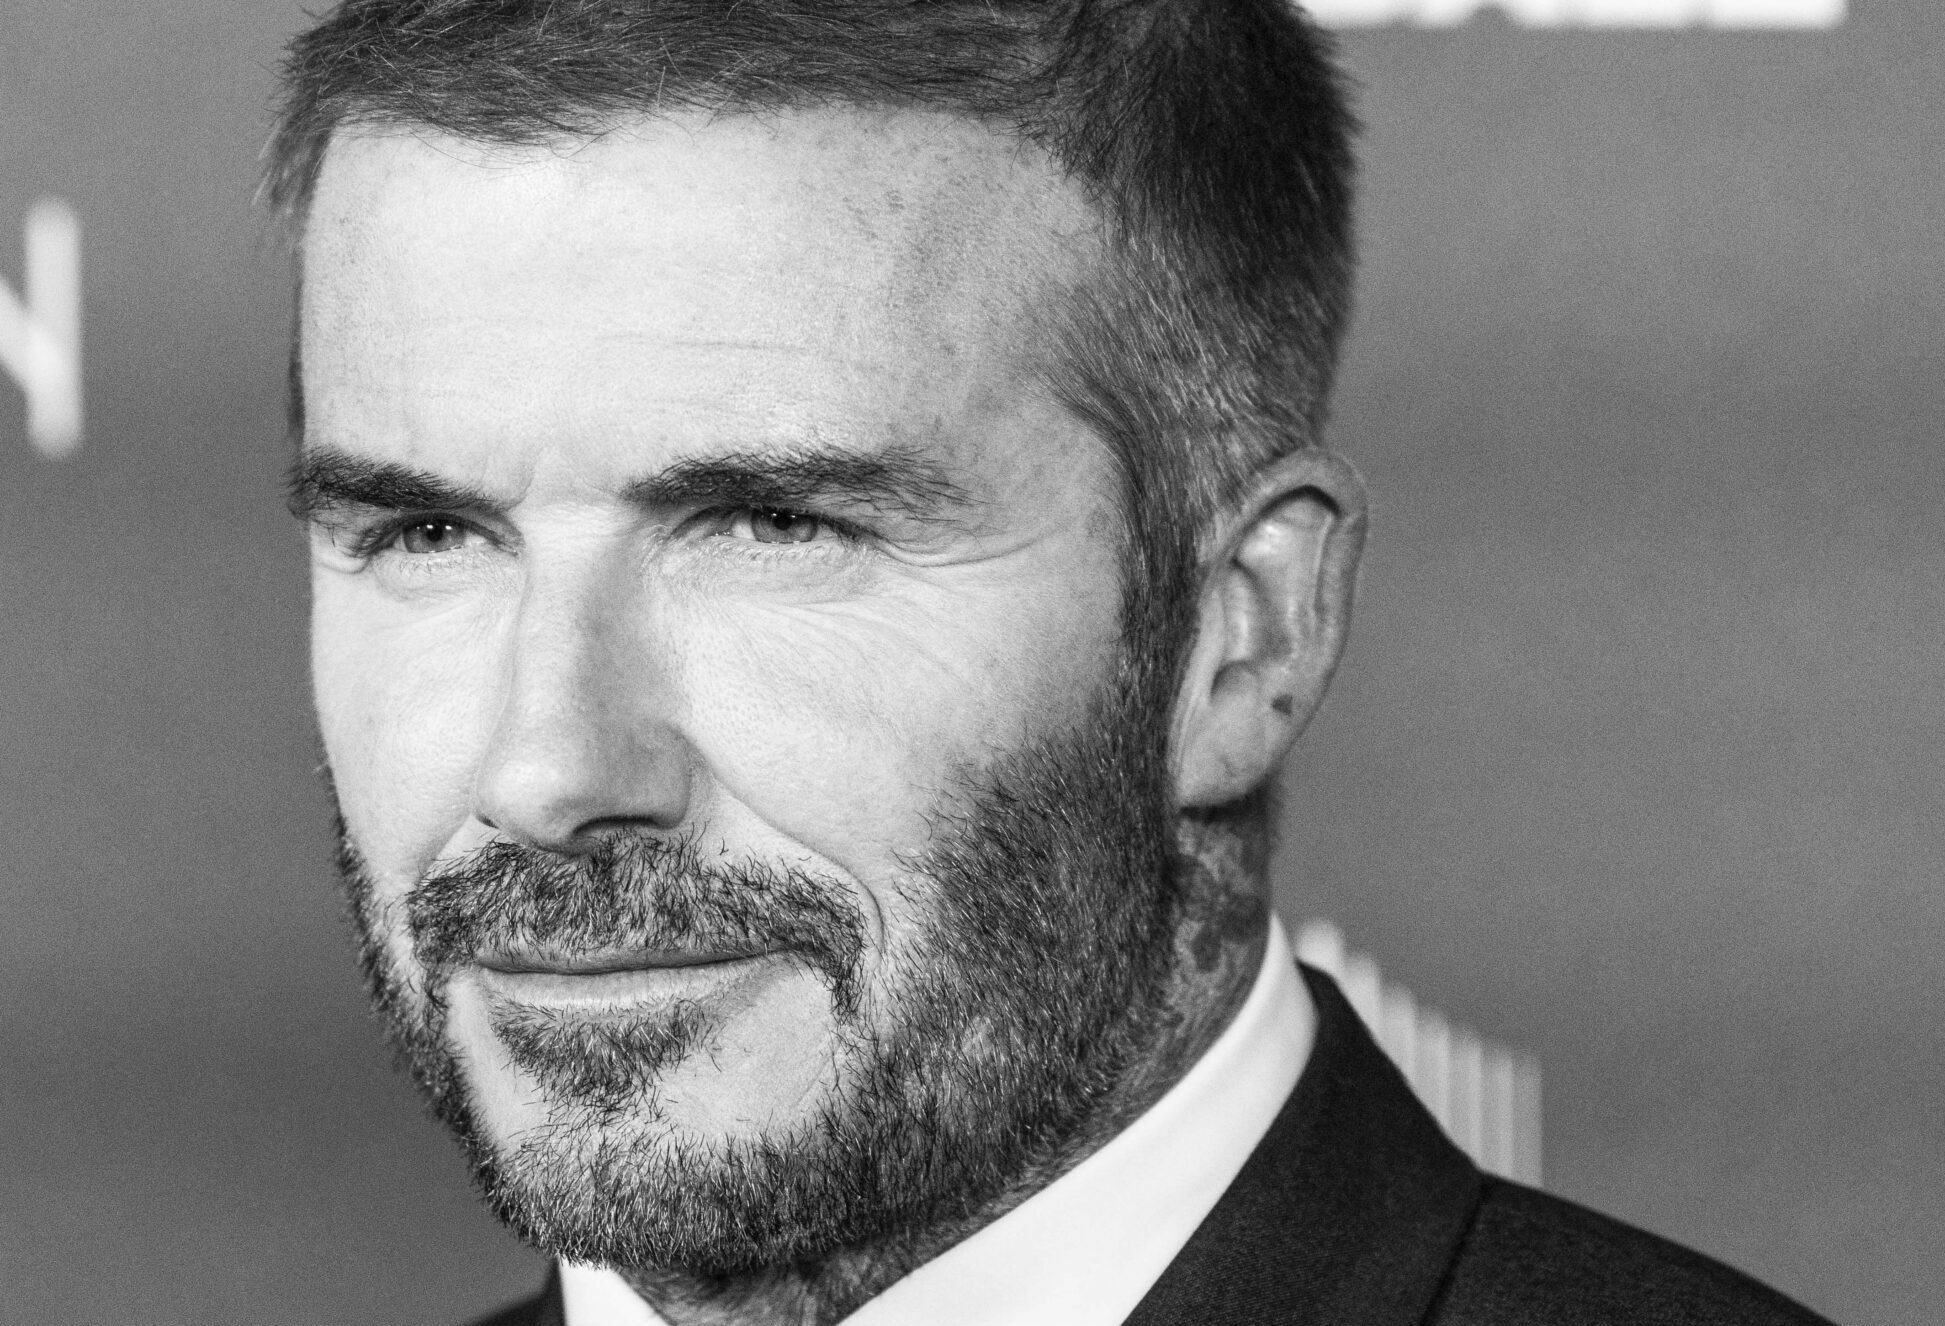 David Beckham: “I suffered from depression, but I didn't say it. »